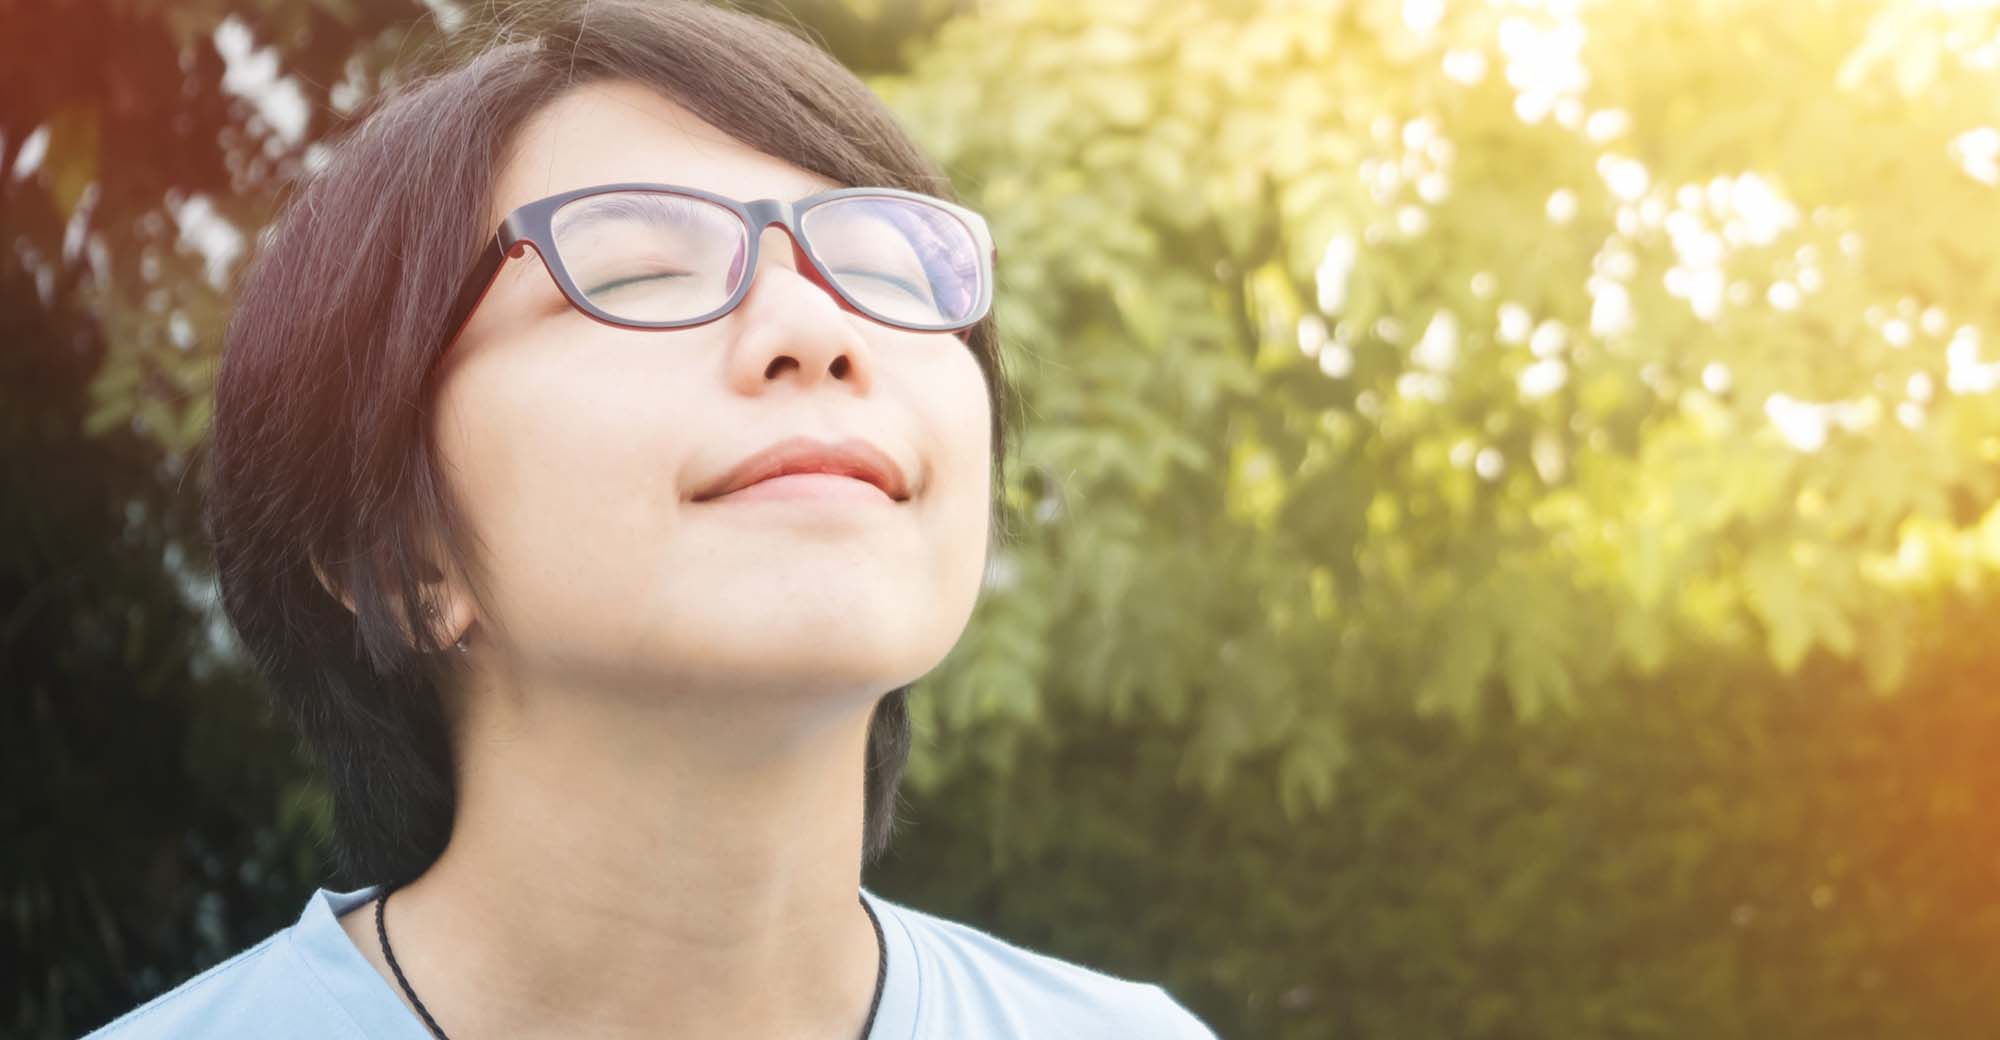 A person wearing glasses looks up toward the sunlight while smiling.